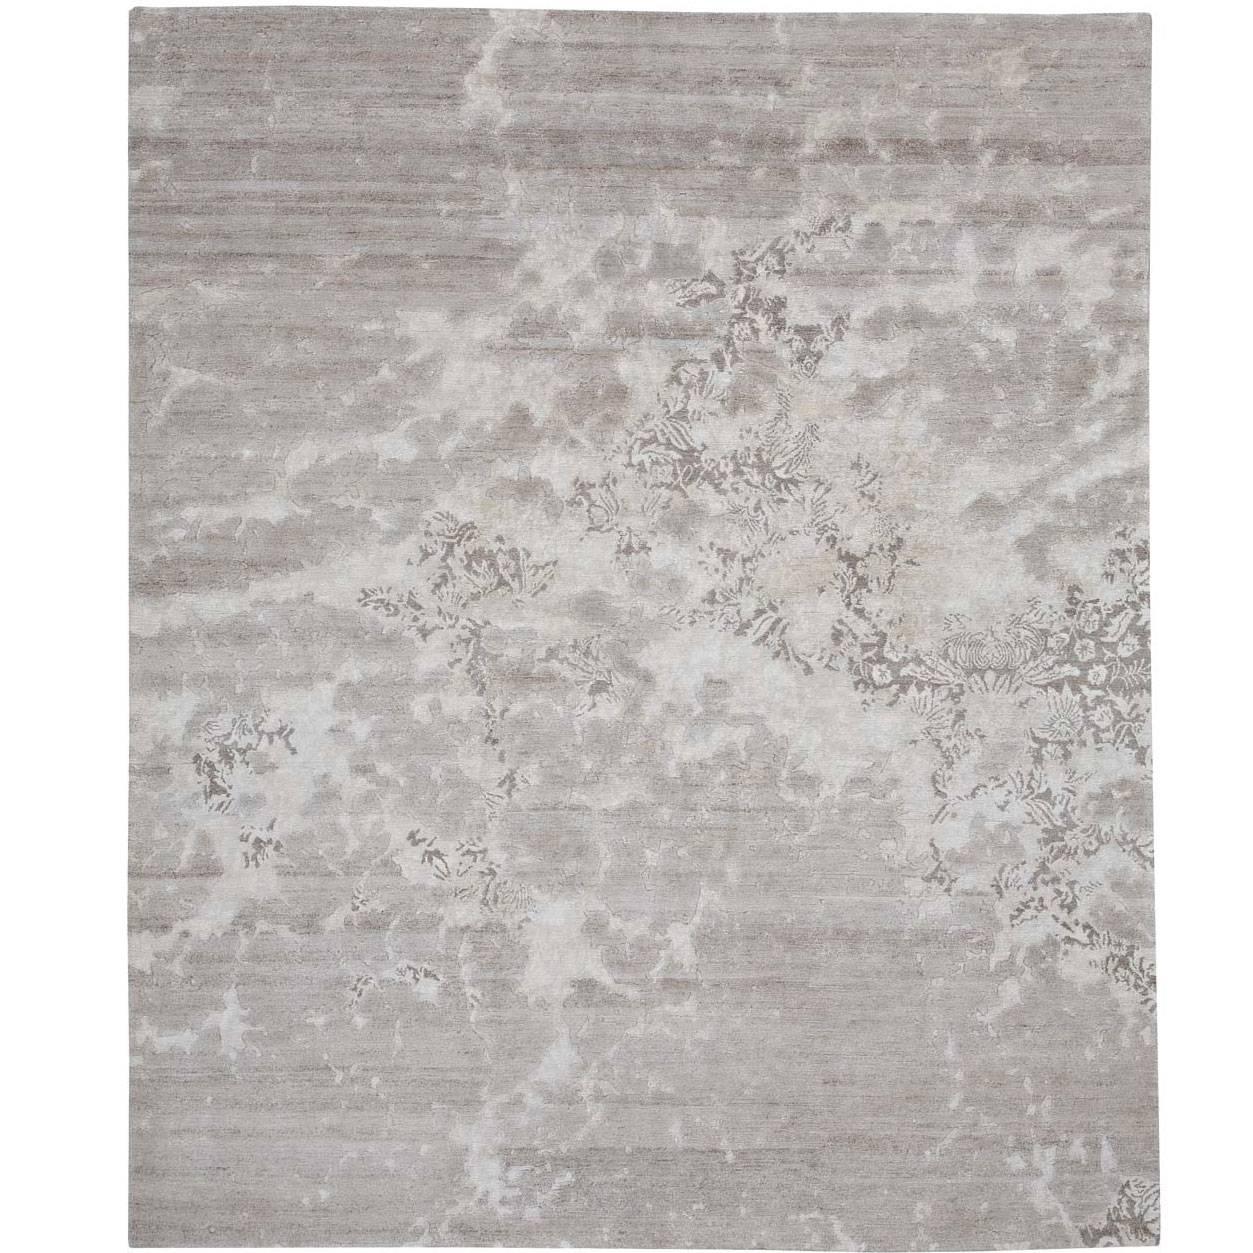 Verona Air from Erased Heritage Carpet Collection by Jan Kath For Sale